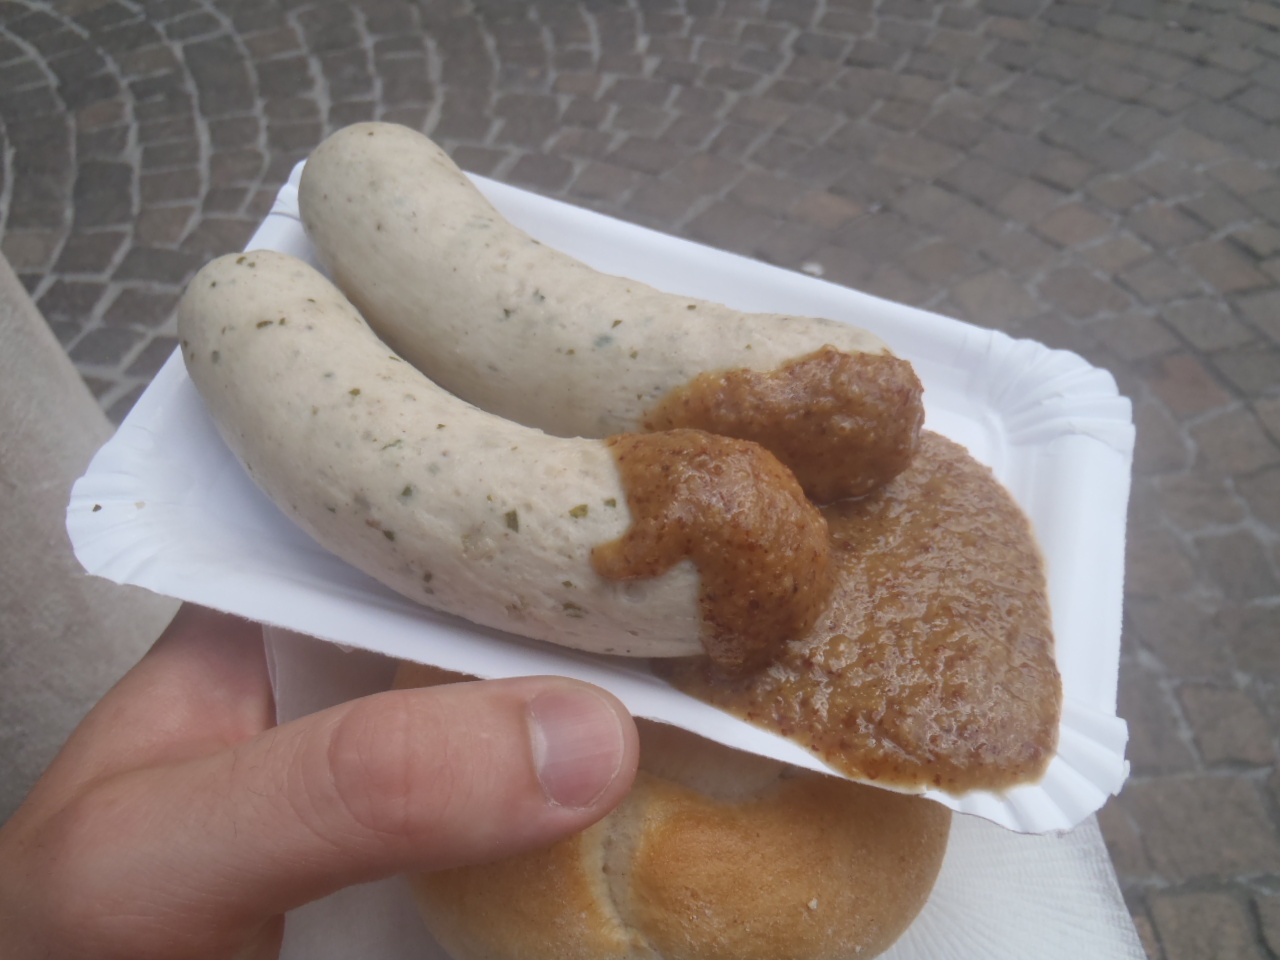 A pair of weisswurst from a sausage stand in Salzburg.